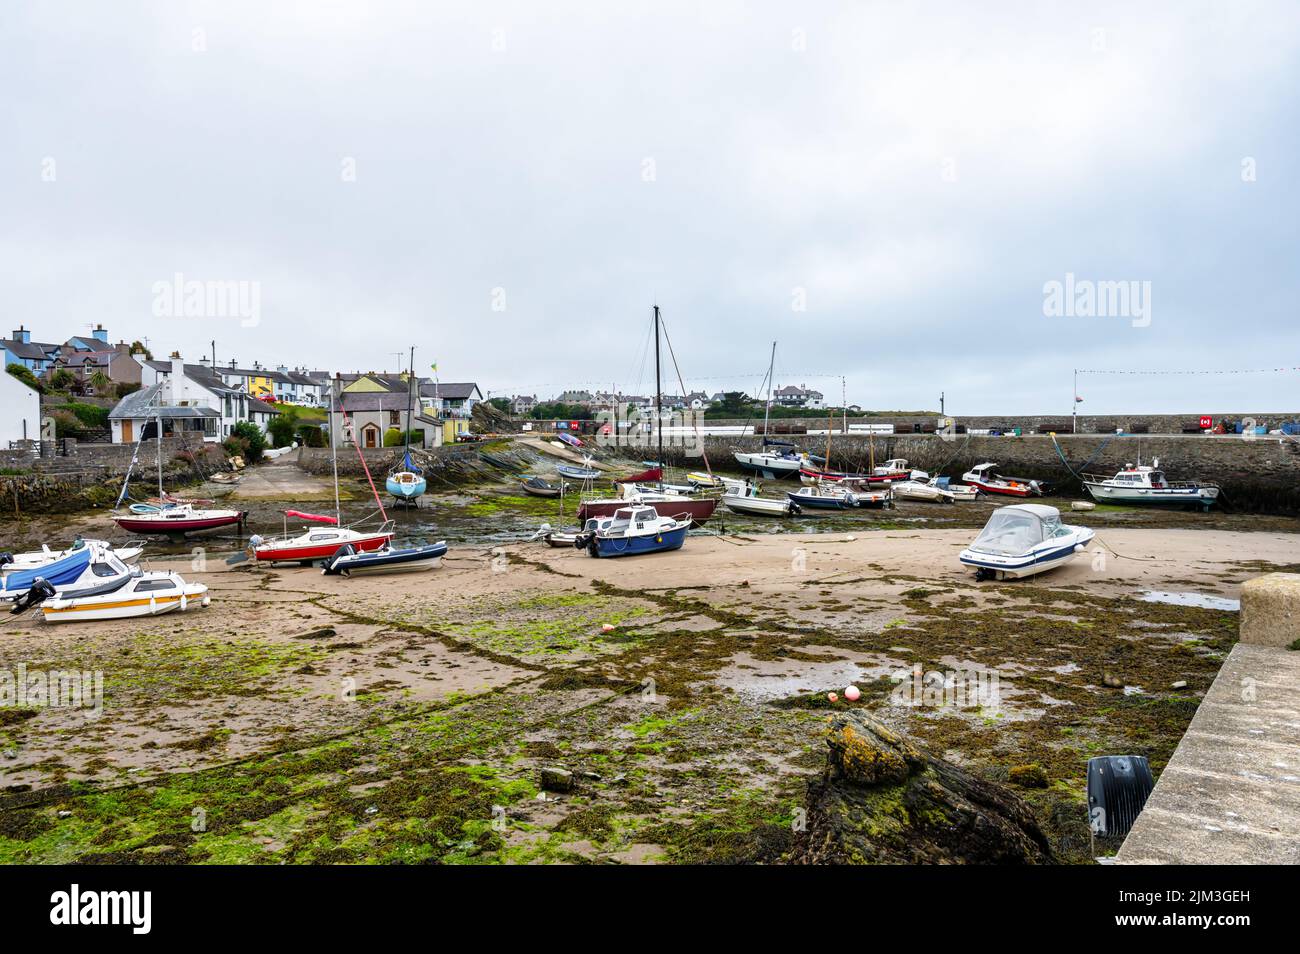 Cemaes, UK- July 8, 2022: Lowtide at Cemaes Bay Harbour on the island of Anglesey in Wales Stock Photo